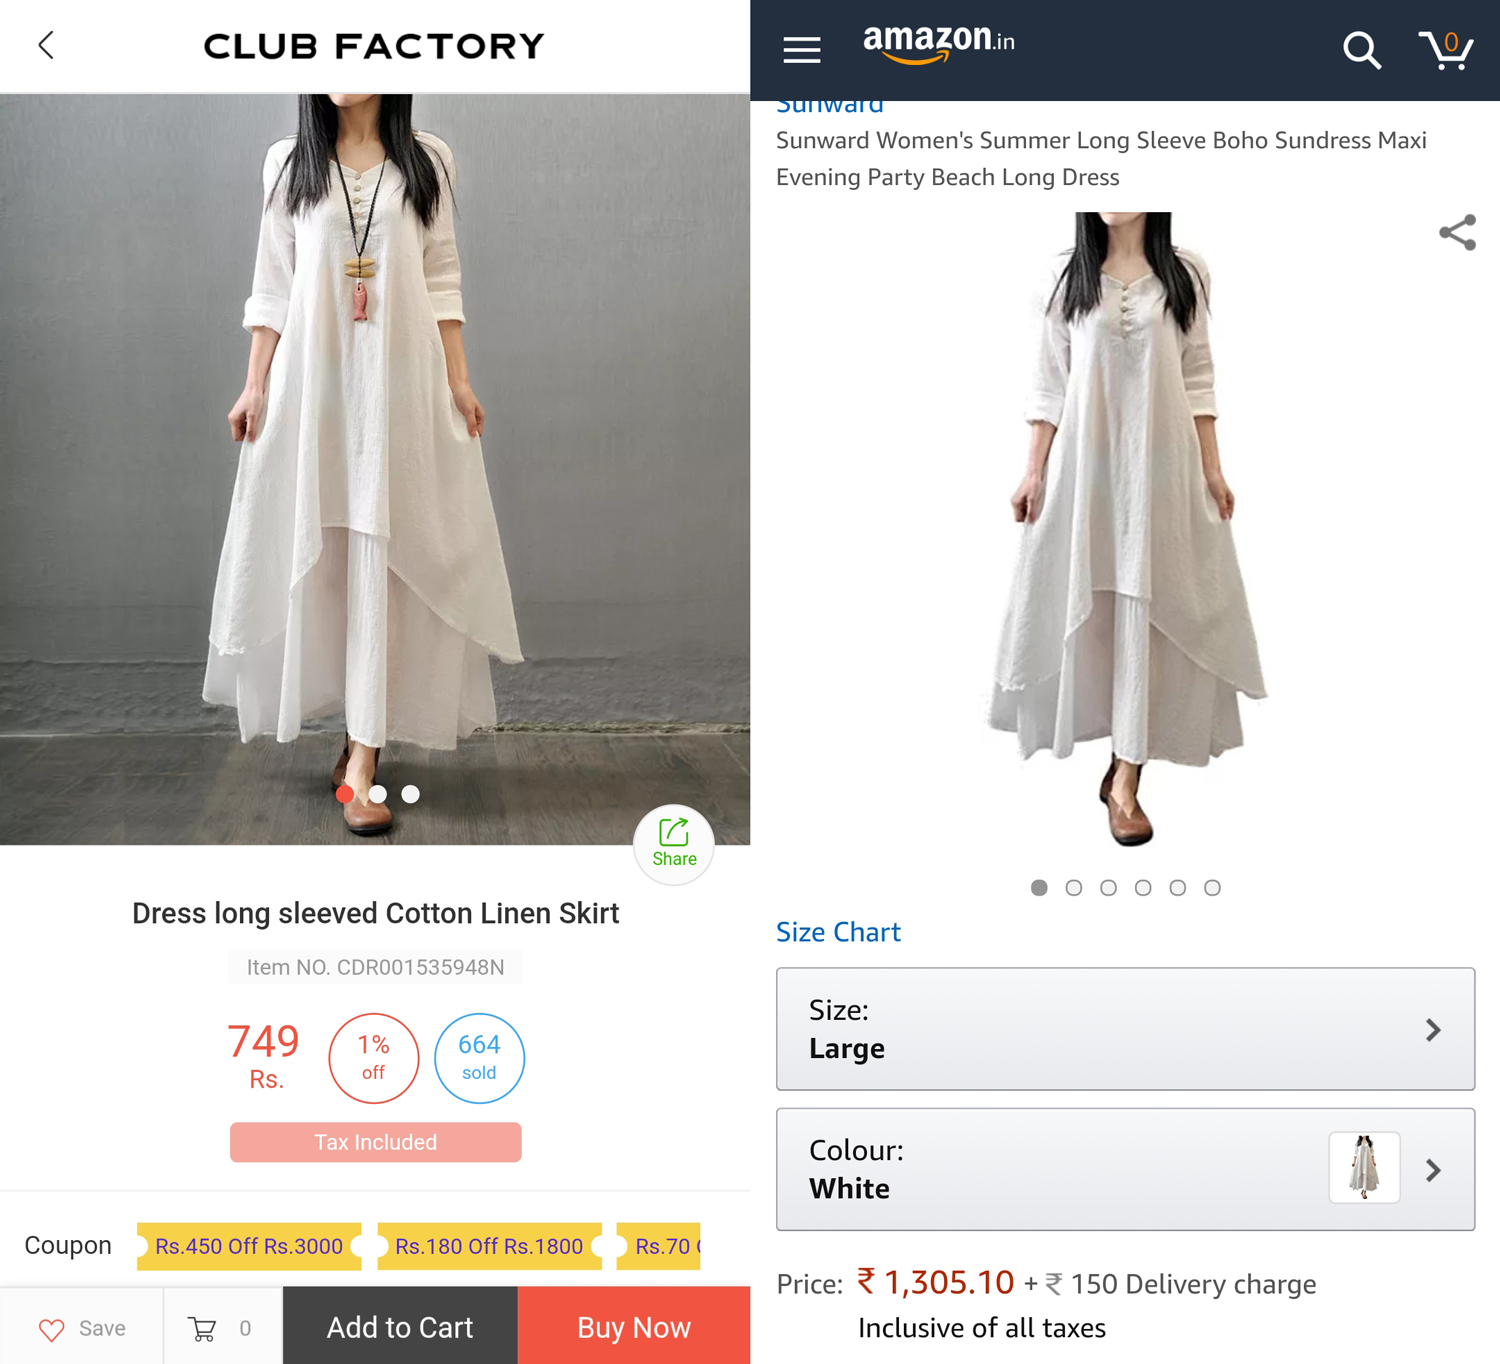 A comparison of the same product listed on Club Factory and Amazon